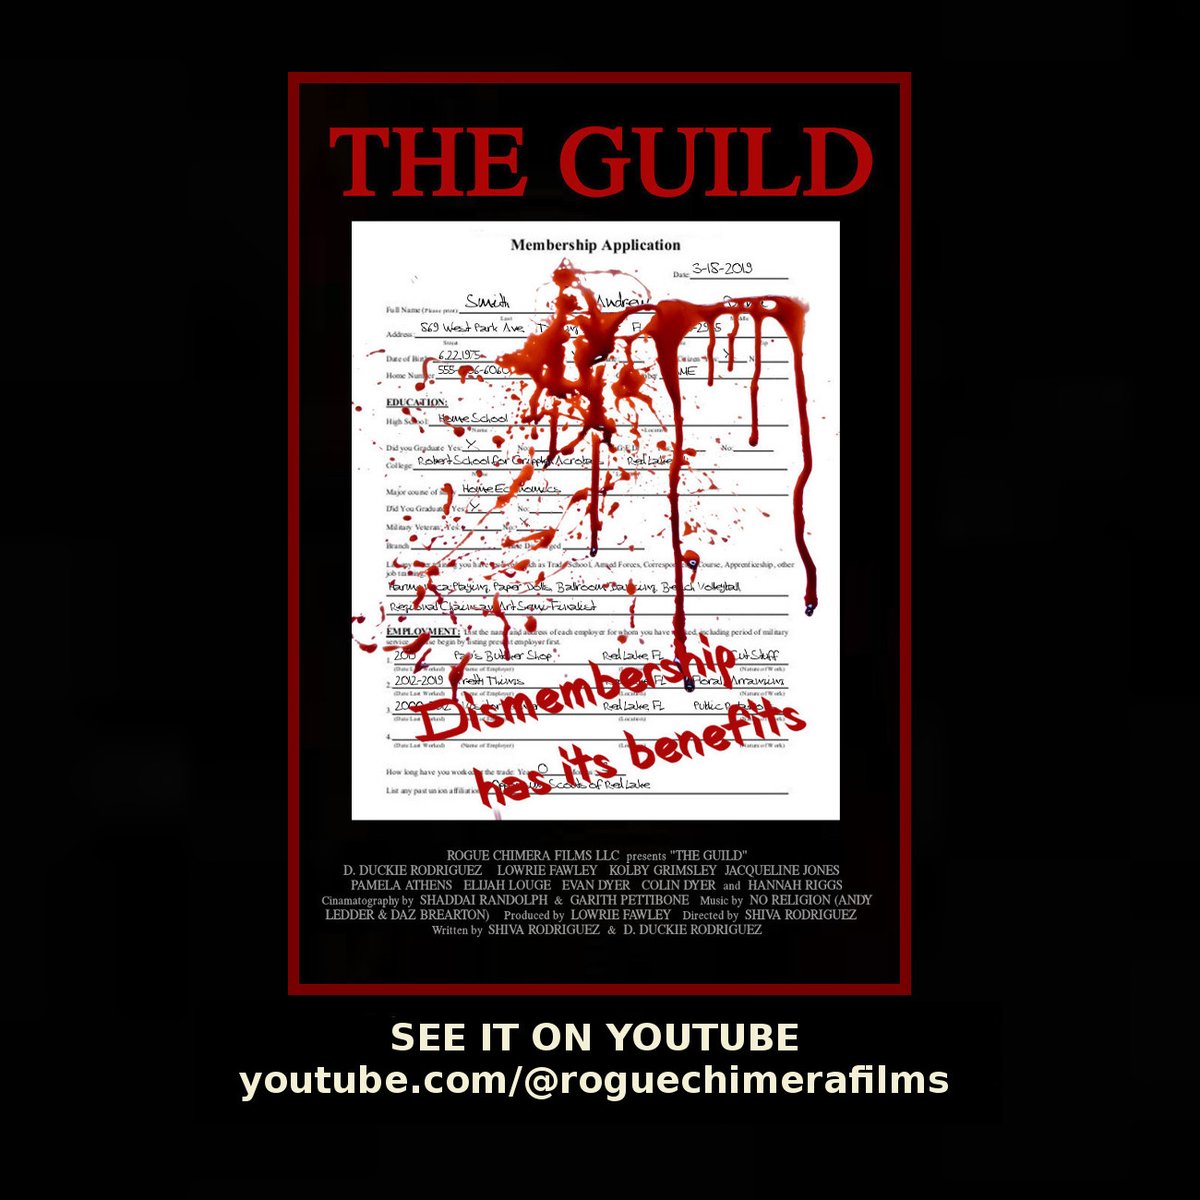 THE GUILD (FILM)

Directed by Shiva Rodriguez

Released on YouTube - youtube.com/watch?v=G6rgVK… 

#rogue #chimera #films #film #movie #movies #horrormovie #horrrormovies #horrorgenre #independentfilm #indyfilm #independenthorrror #indyhorror #screenplay #screenwriter #writer